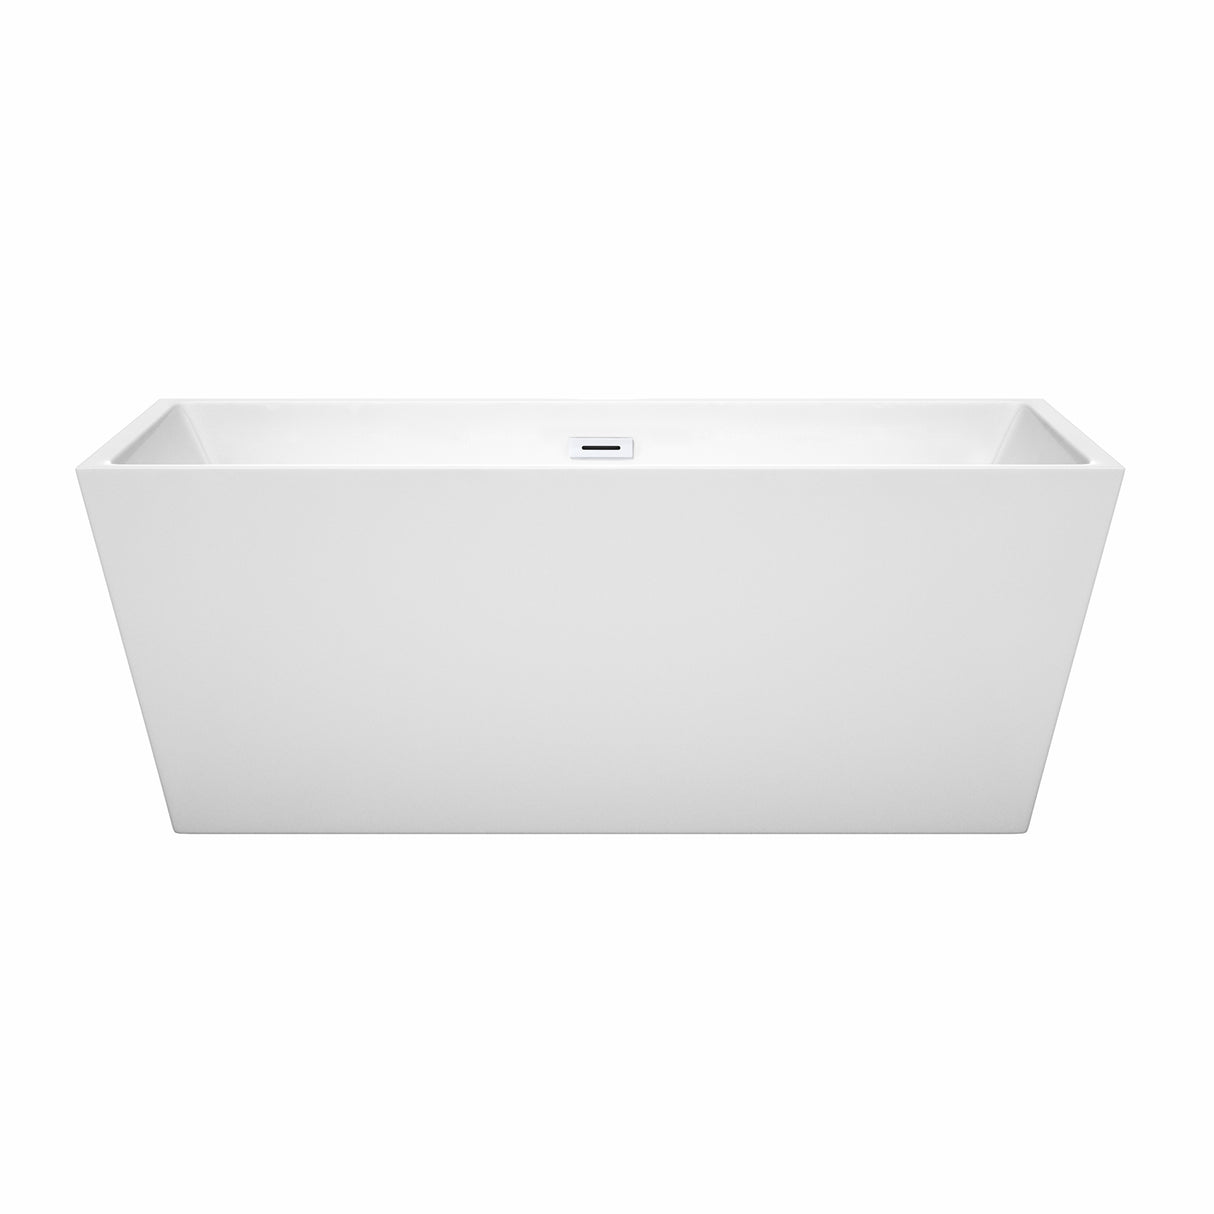 Sara 63 Inch Freestanding Bathtub in White with Shiny White Drain and Overflow Trim